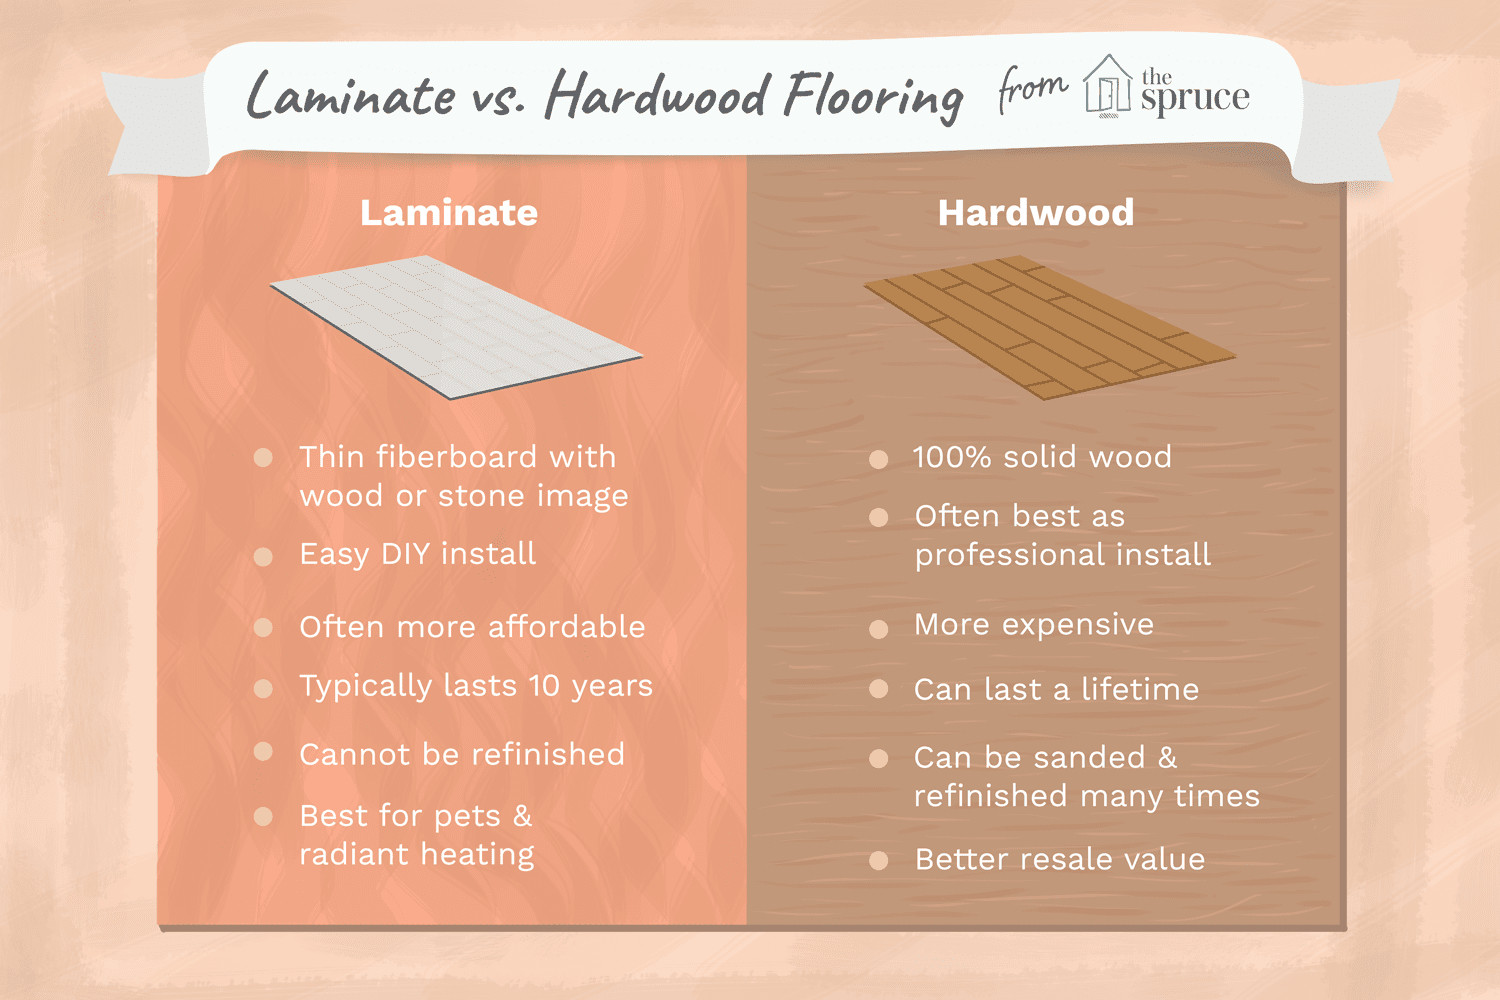 10 Unique ash Hardwood Flooring Reviews 2024 free download ash hardwood flooring reviews of laminate vs hardwood doesnt have to be a hard decision throughout hardwood doesnt have to be a hard decision